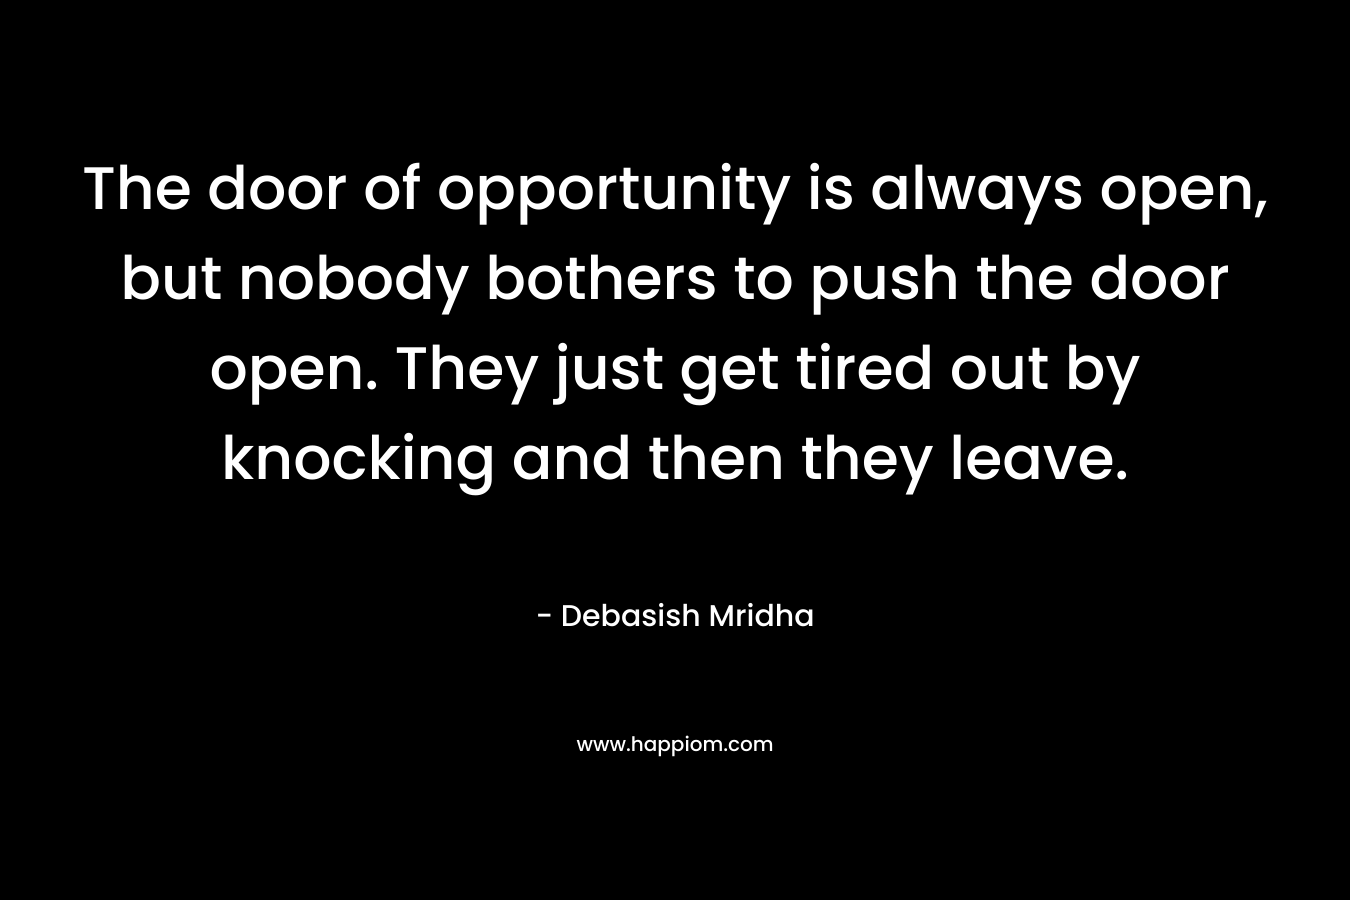 The door of opportunity is always open, but nobody bothers to push the door open. They just get tired out by knocking and then they leave. – Debasish Mridha